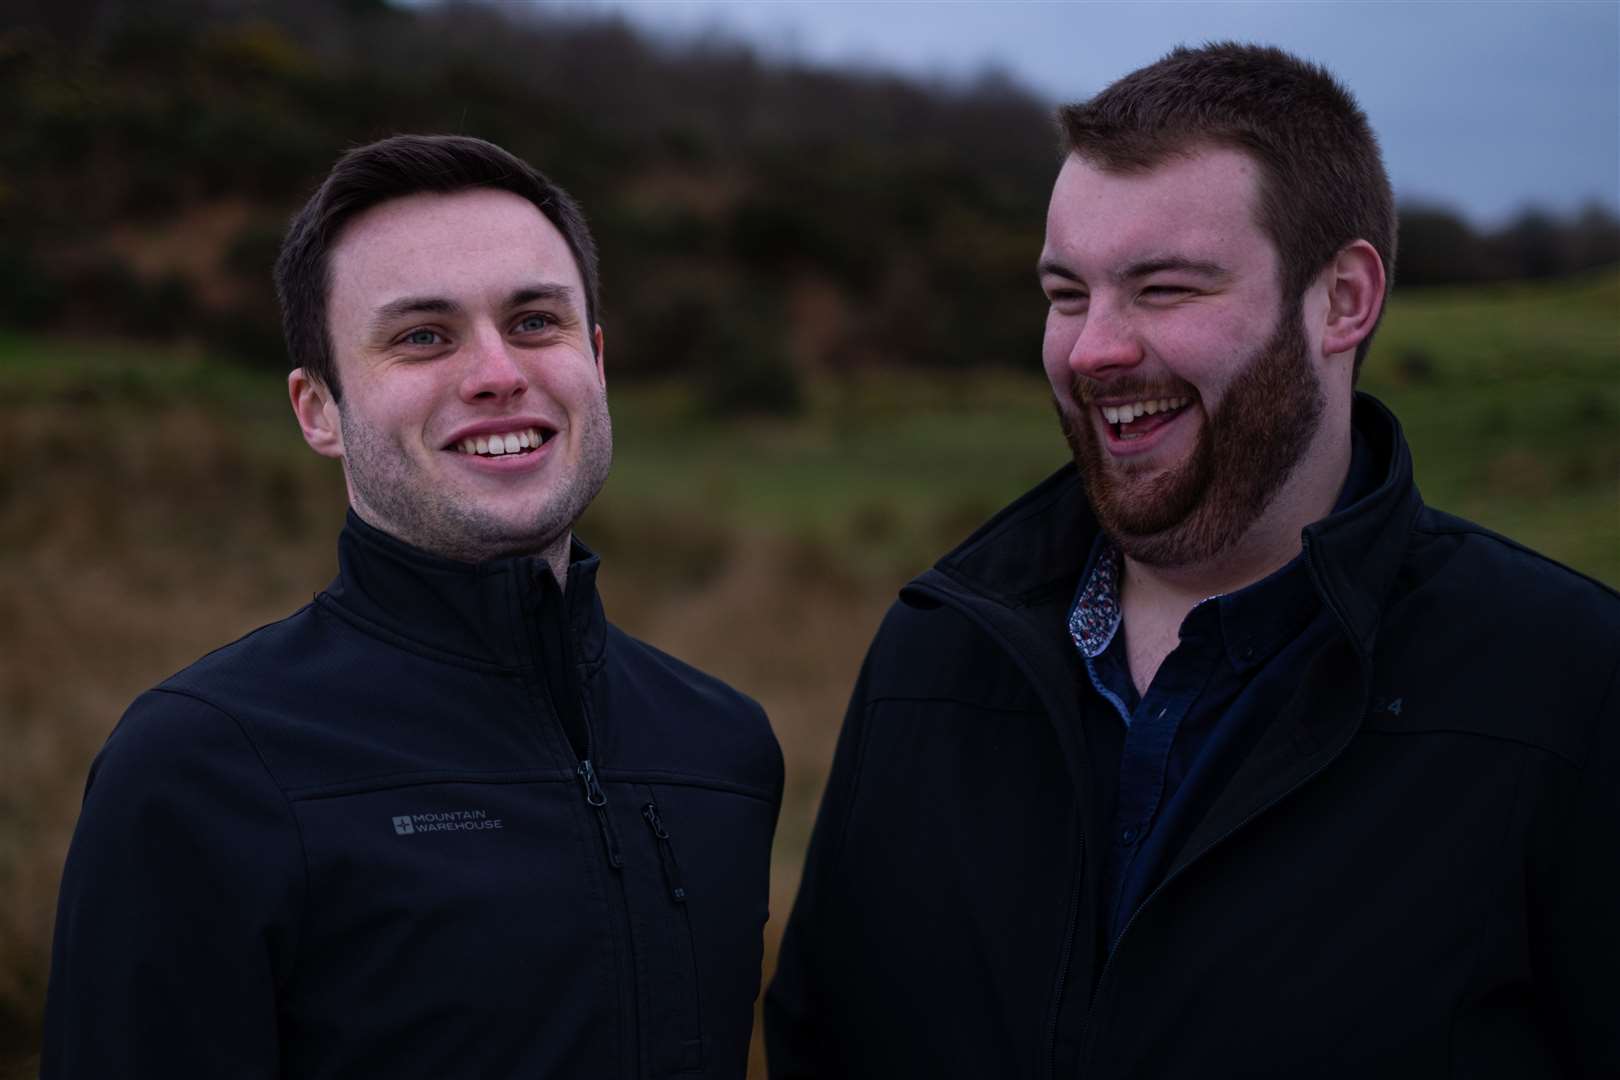 The album is the first collaborative release from Rory and Graham, who have previously worked together as session musicians and are both former finalists of the BBC Radio Scotland Young Musician of The Year.